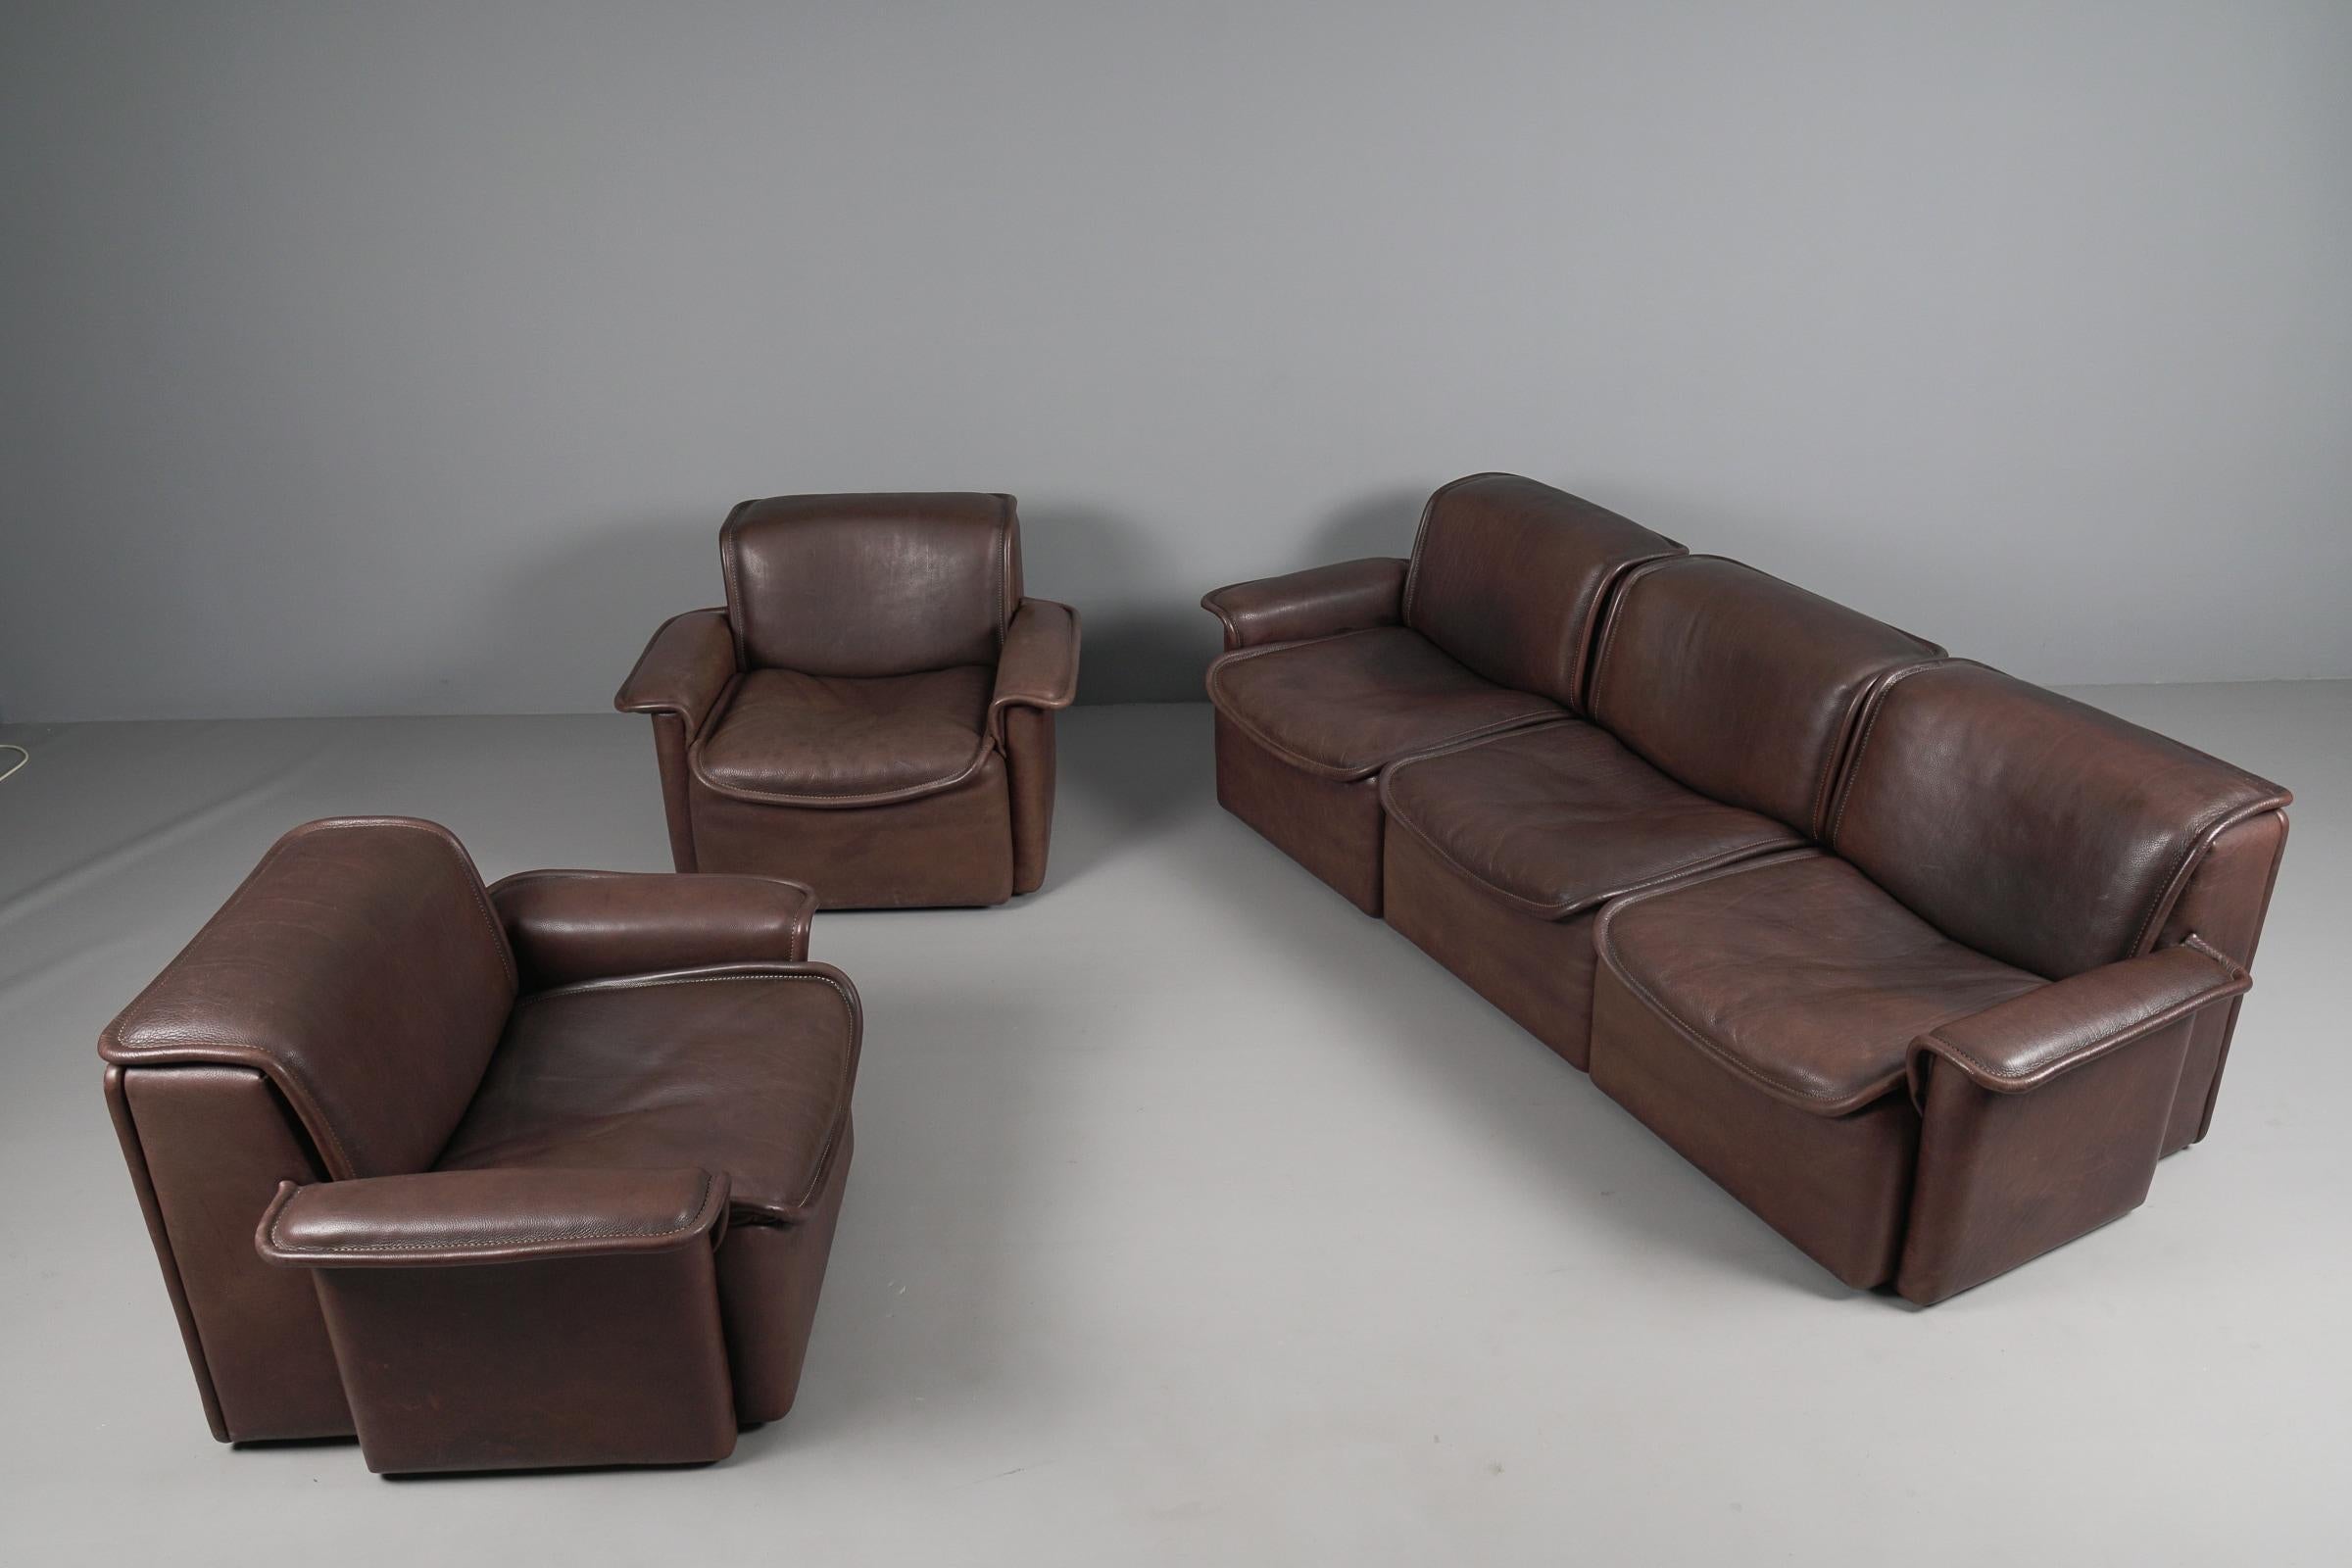 Three Seater Sofa by De Sede DS-12 in Brown Neck Leather, 1960s, Switzerland For Sale 9